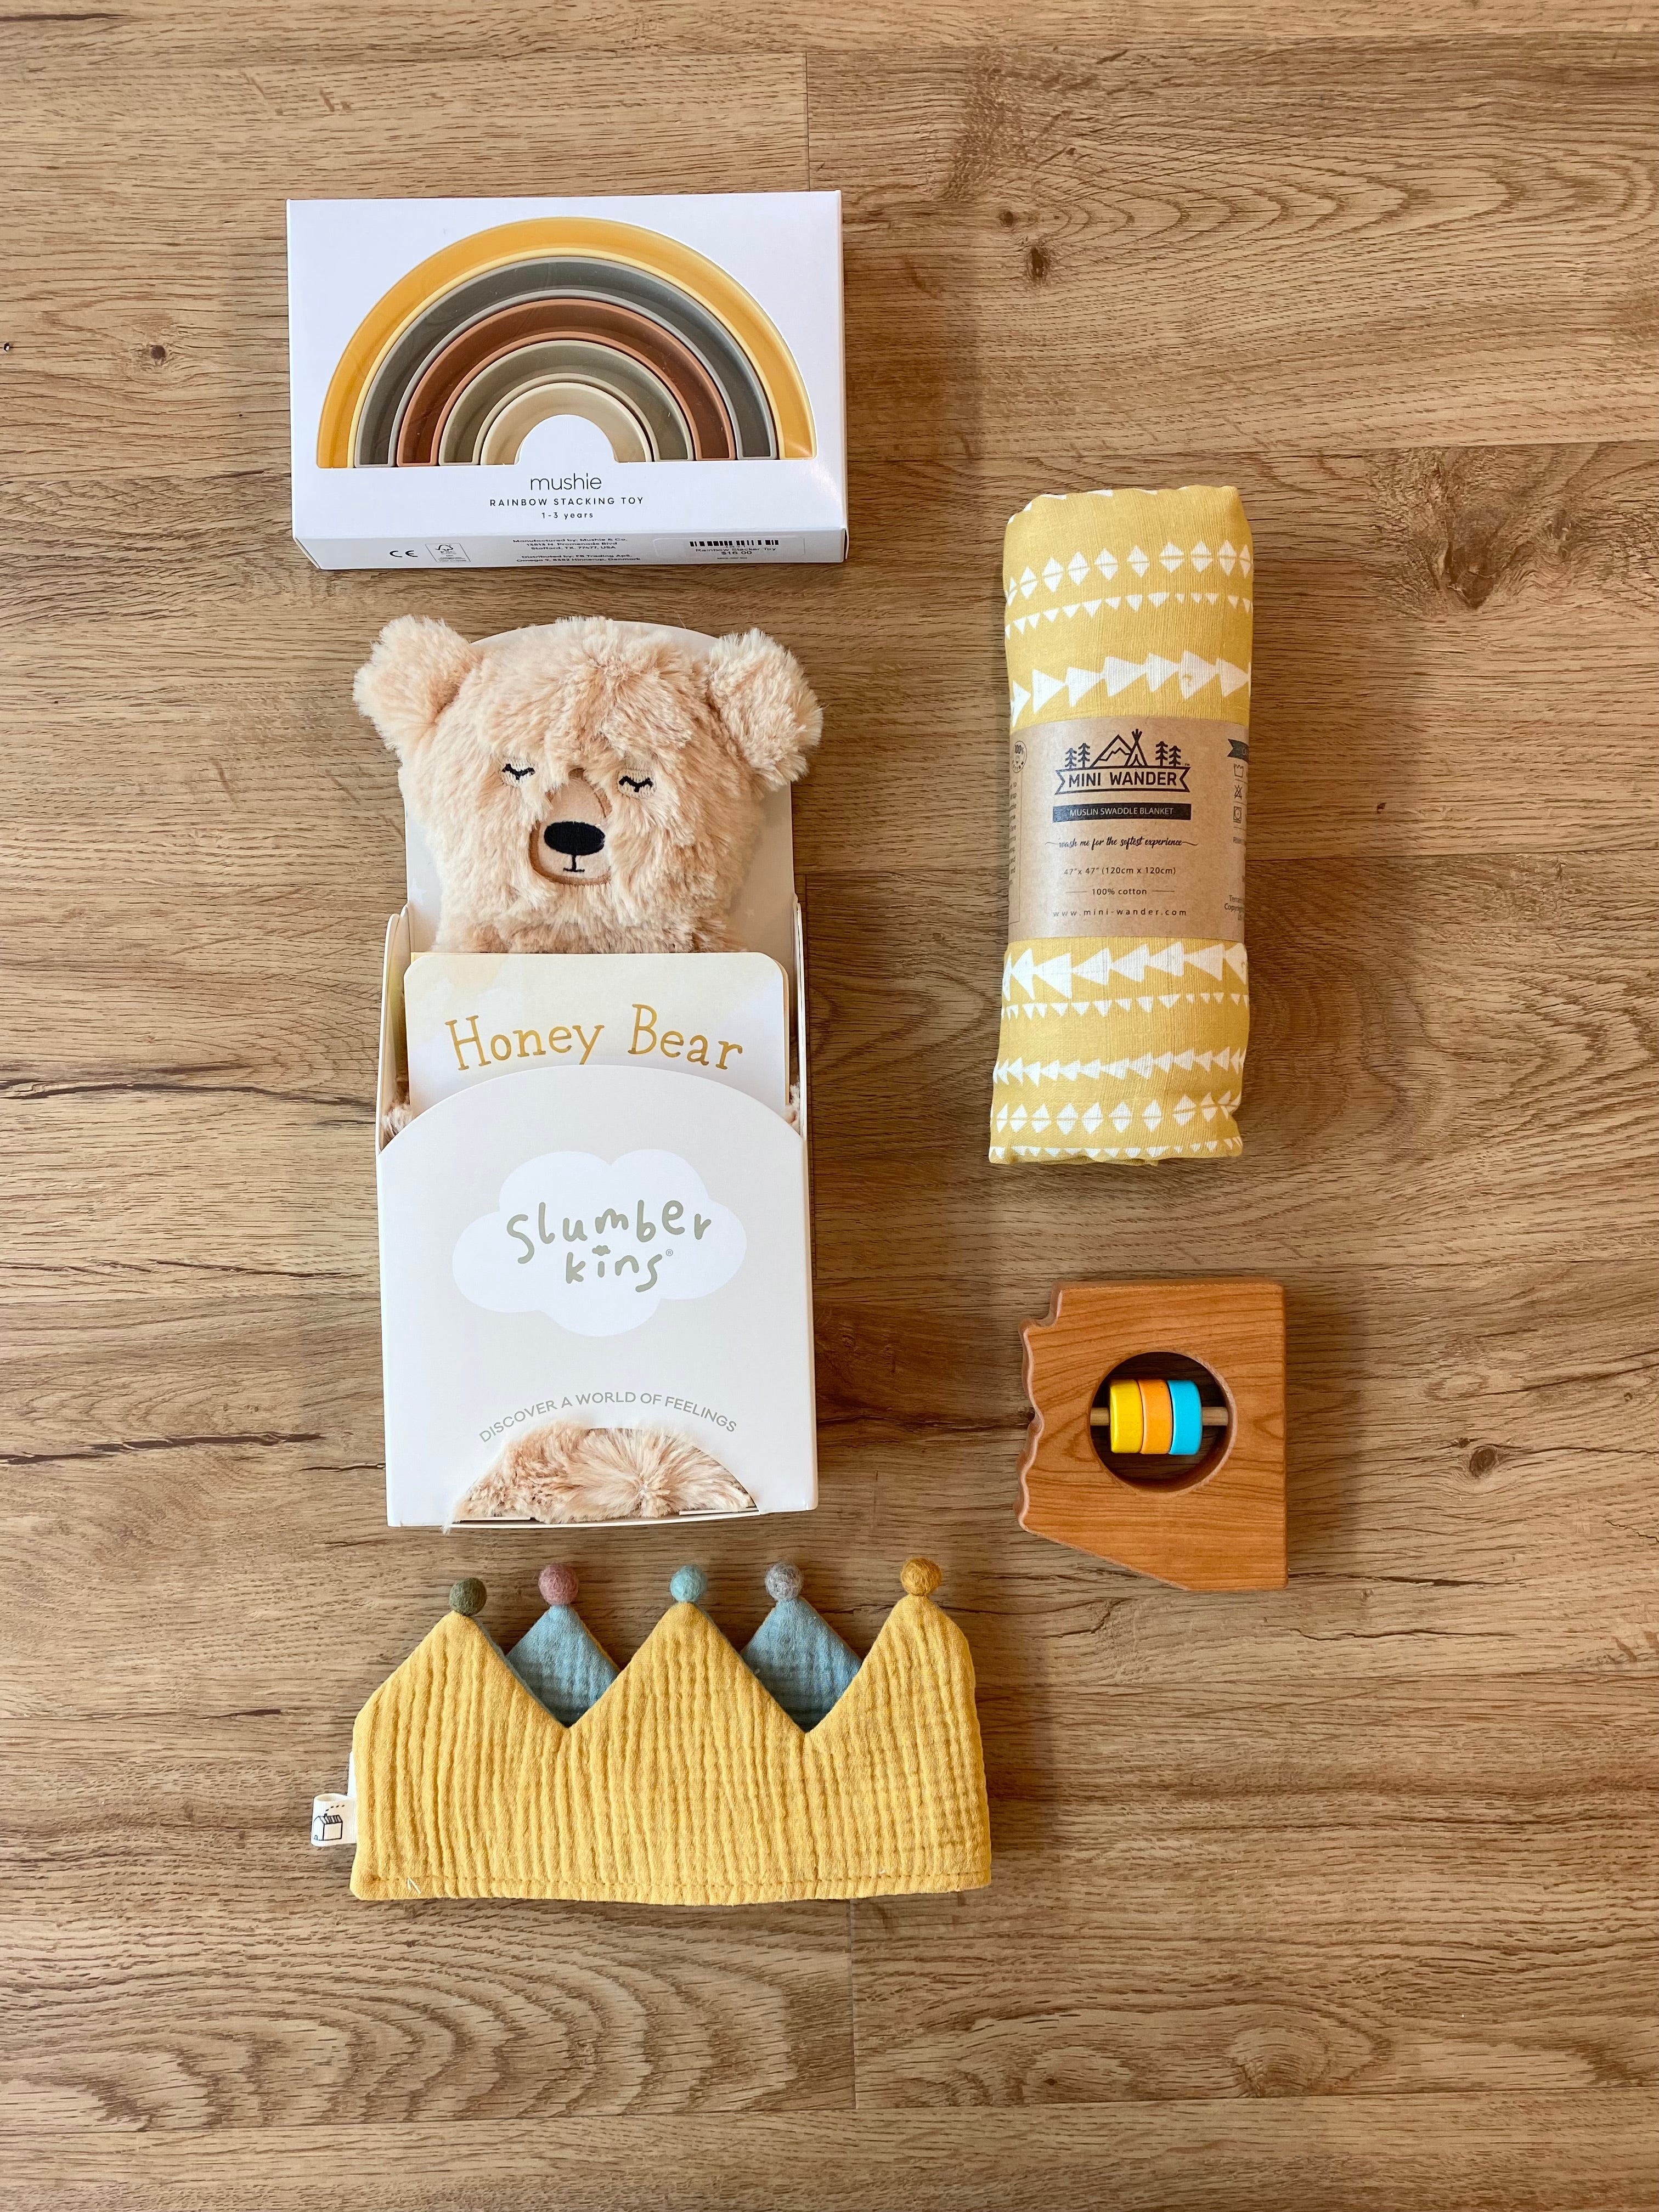 New Baby: Build Your Own Gift Box